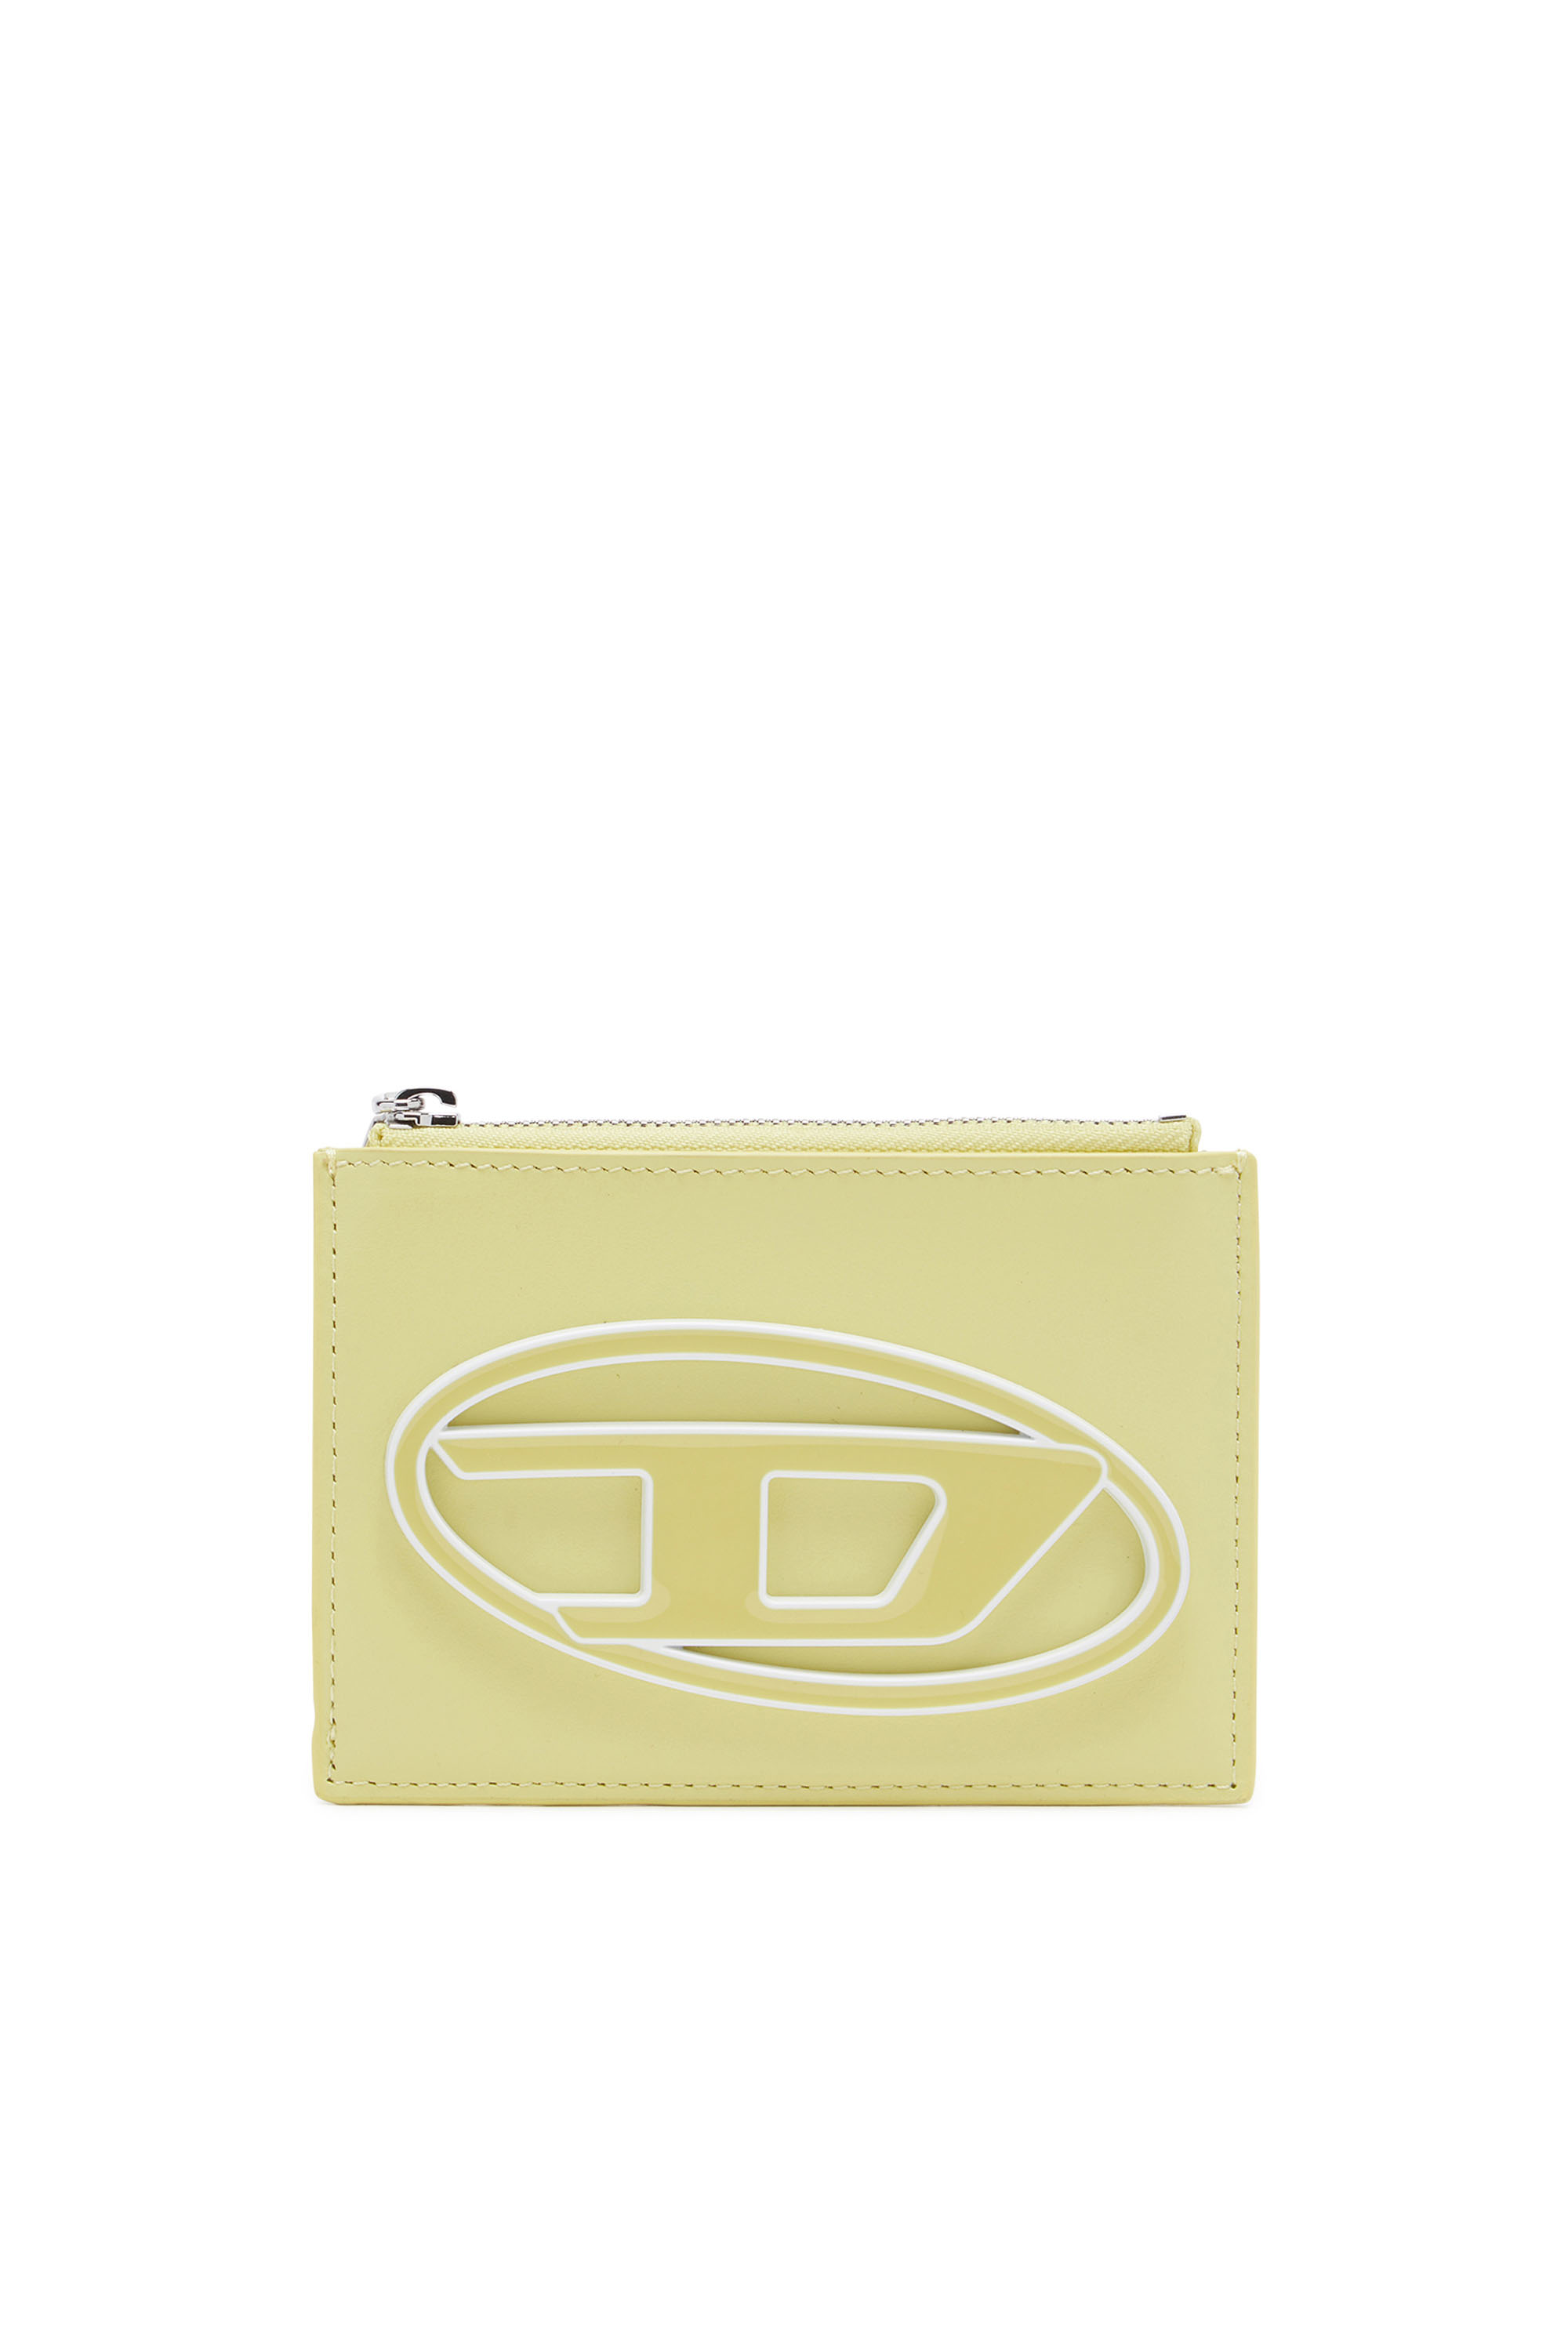 Diesel - 1DR CARD HOLDER I, Woman Card holder in pastel leather in Yellow - Image 1